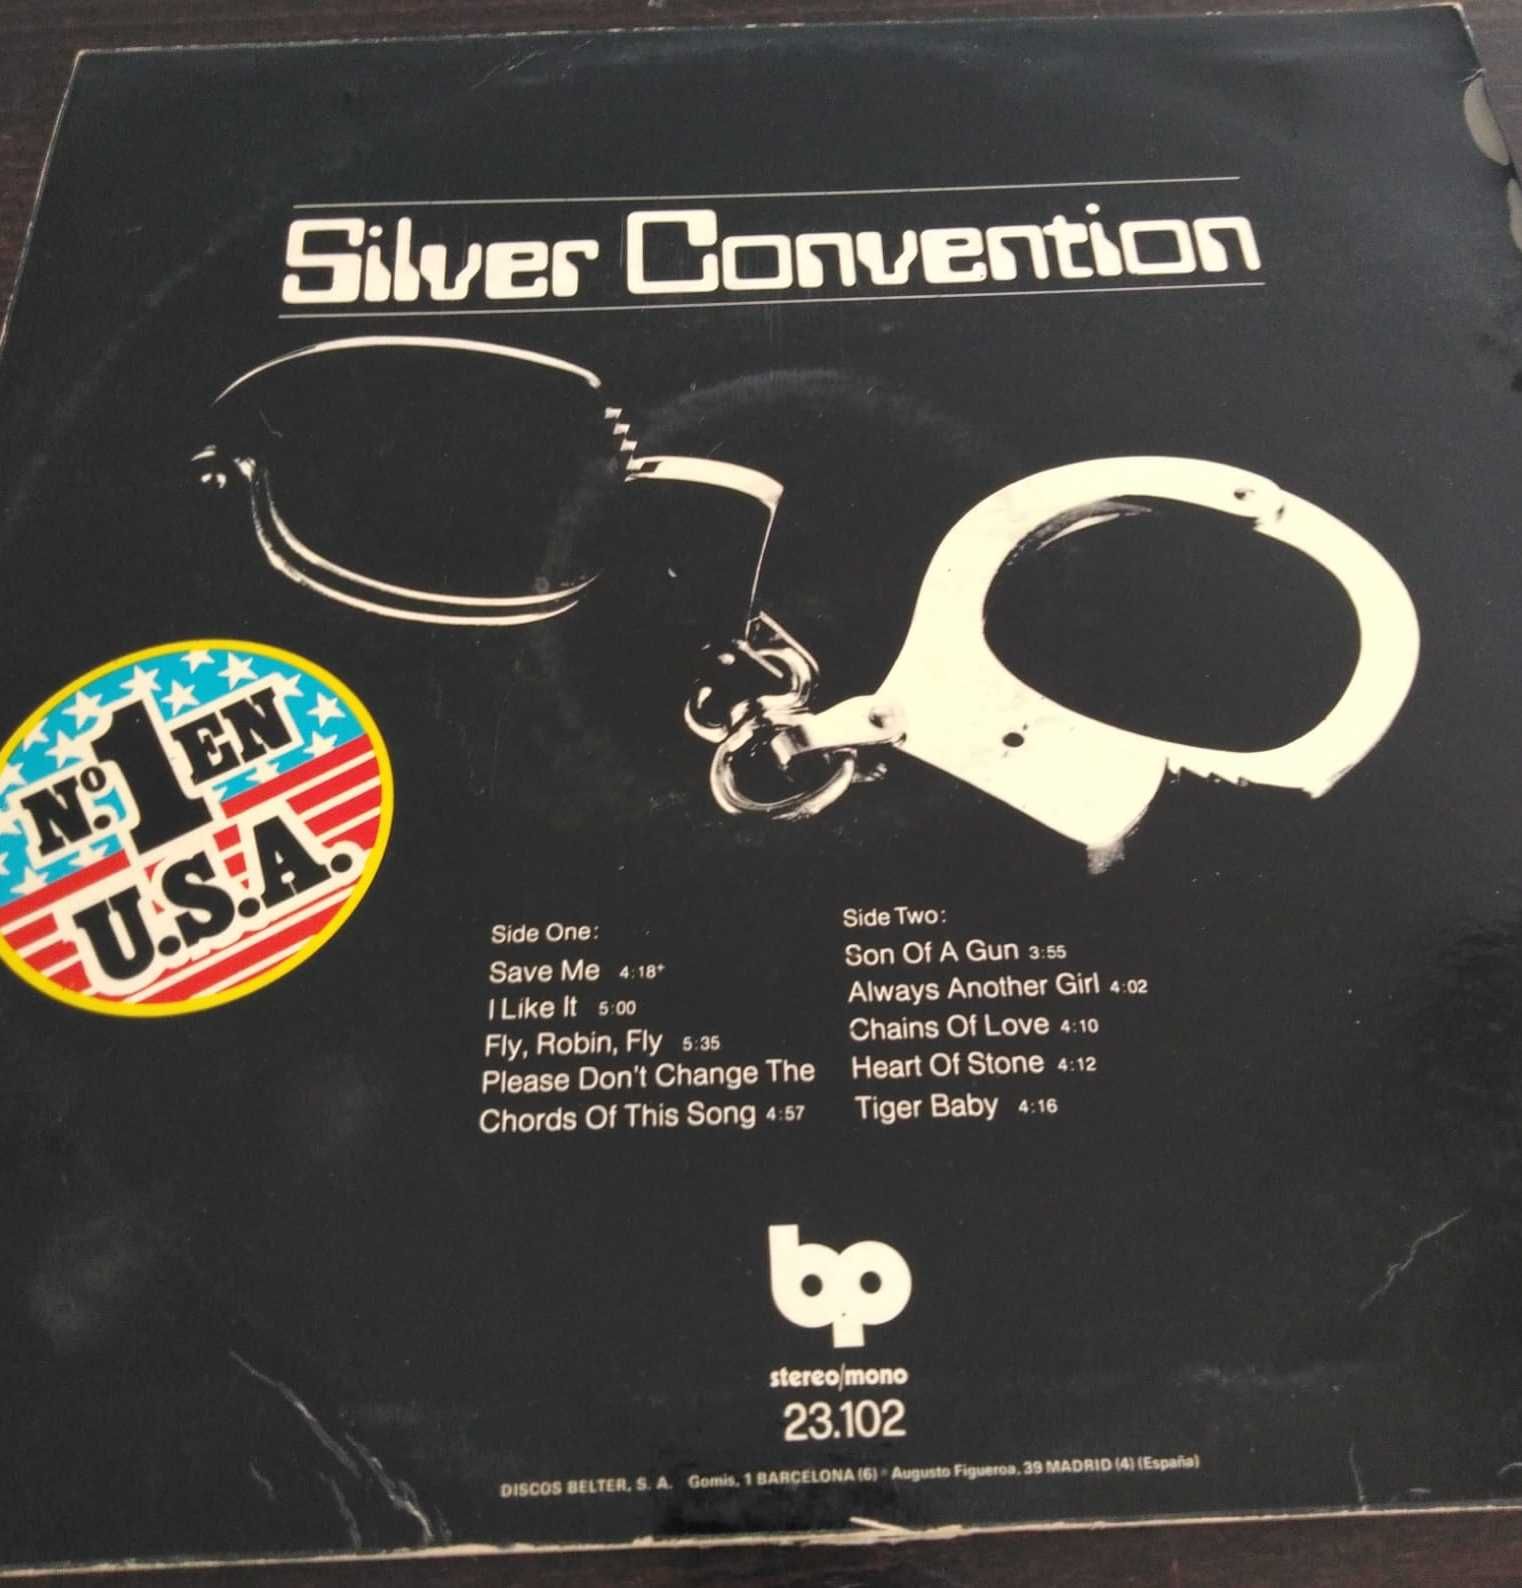 vinil: Silver Convention “Fly, Robin, fly”